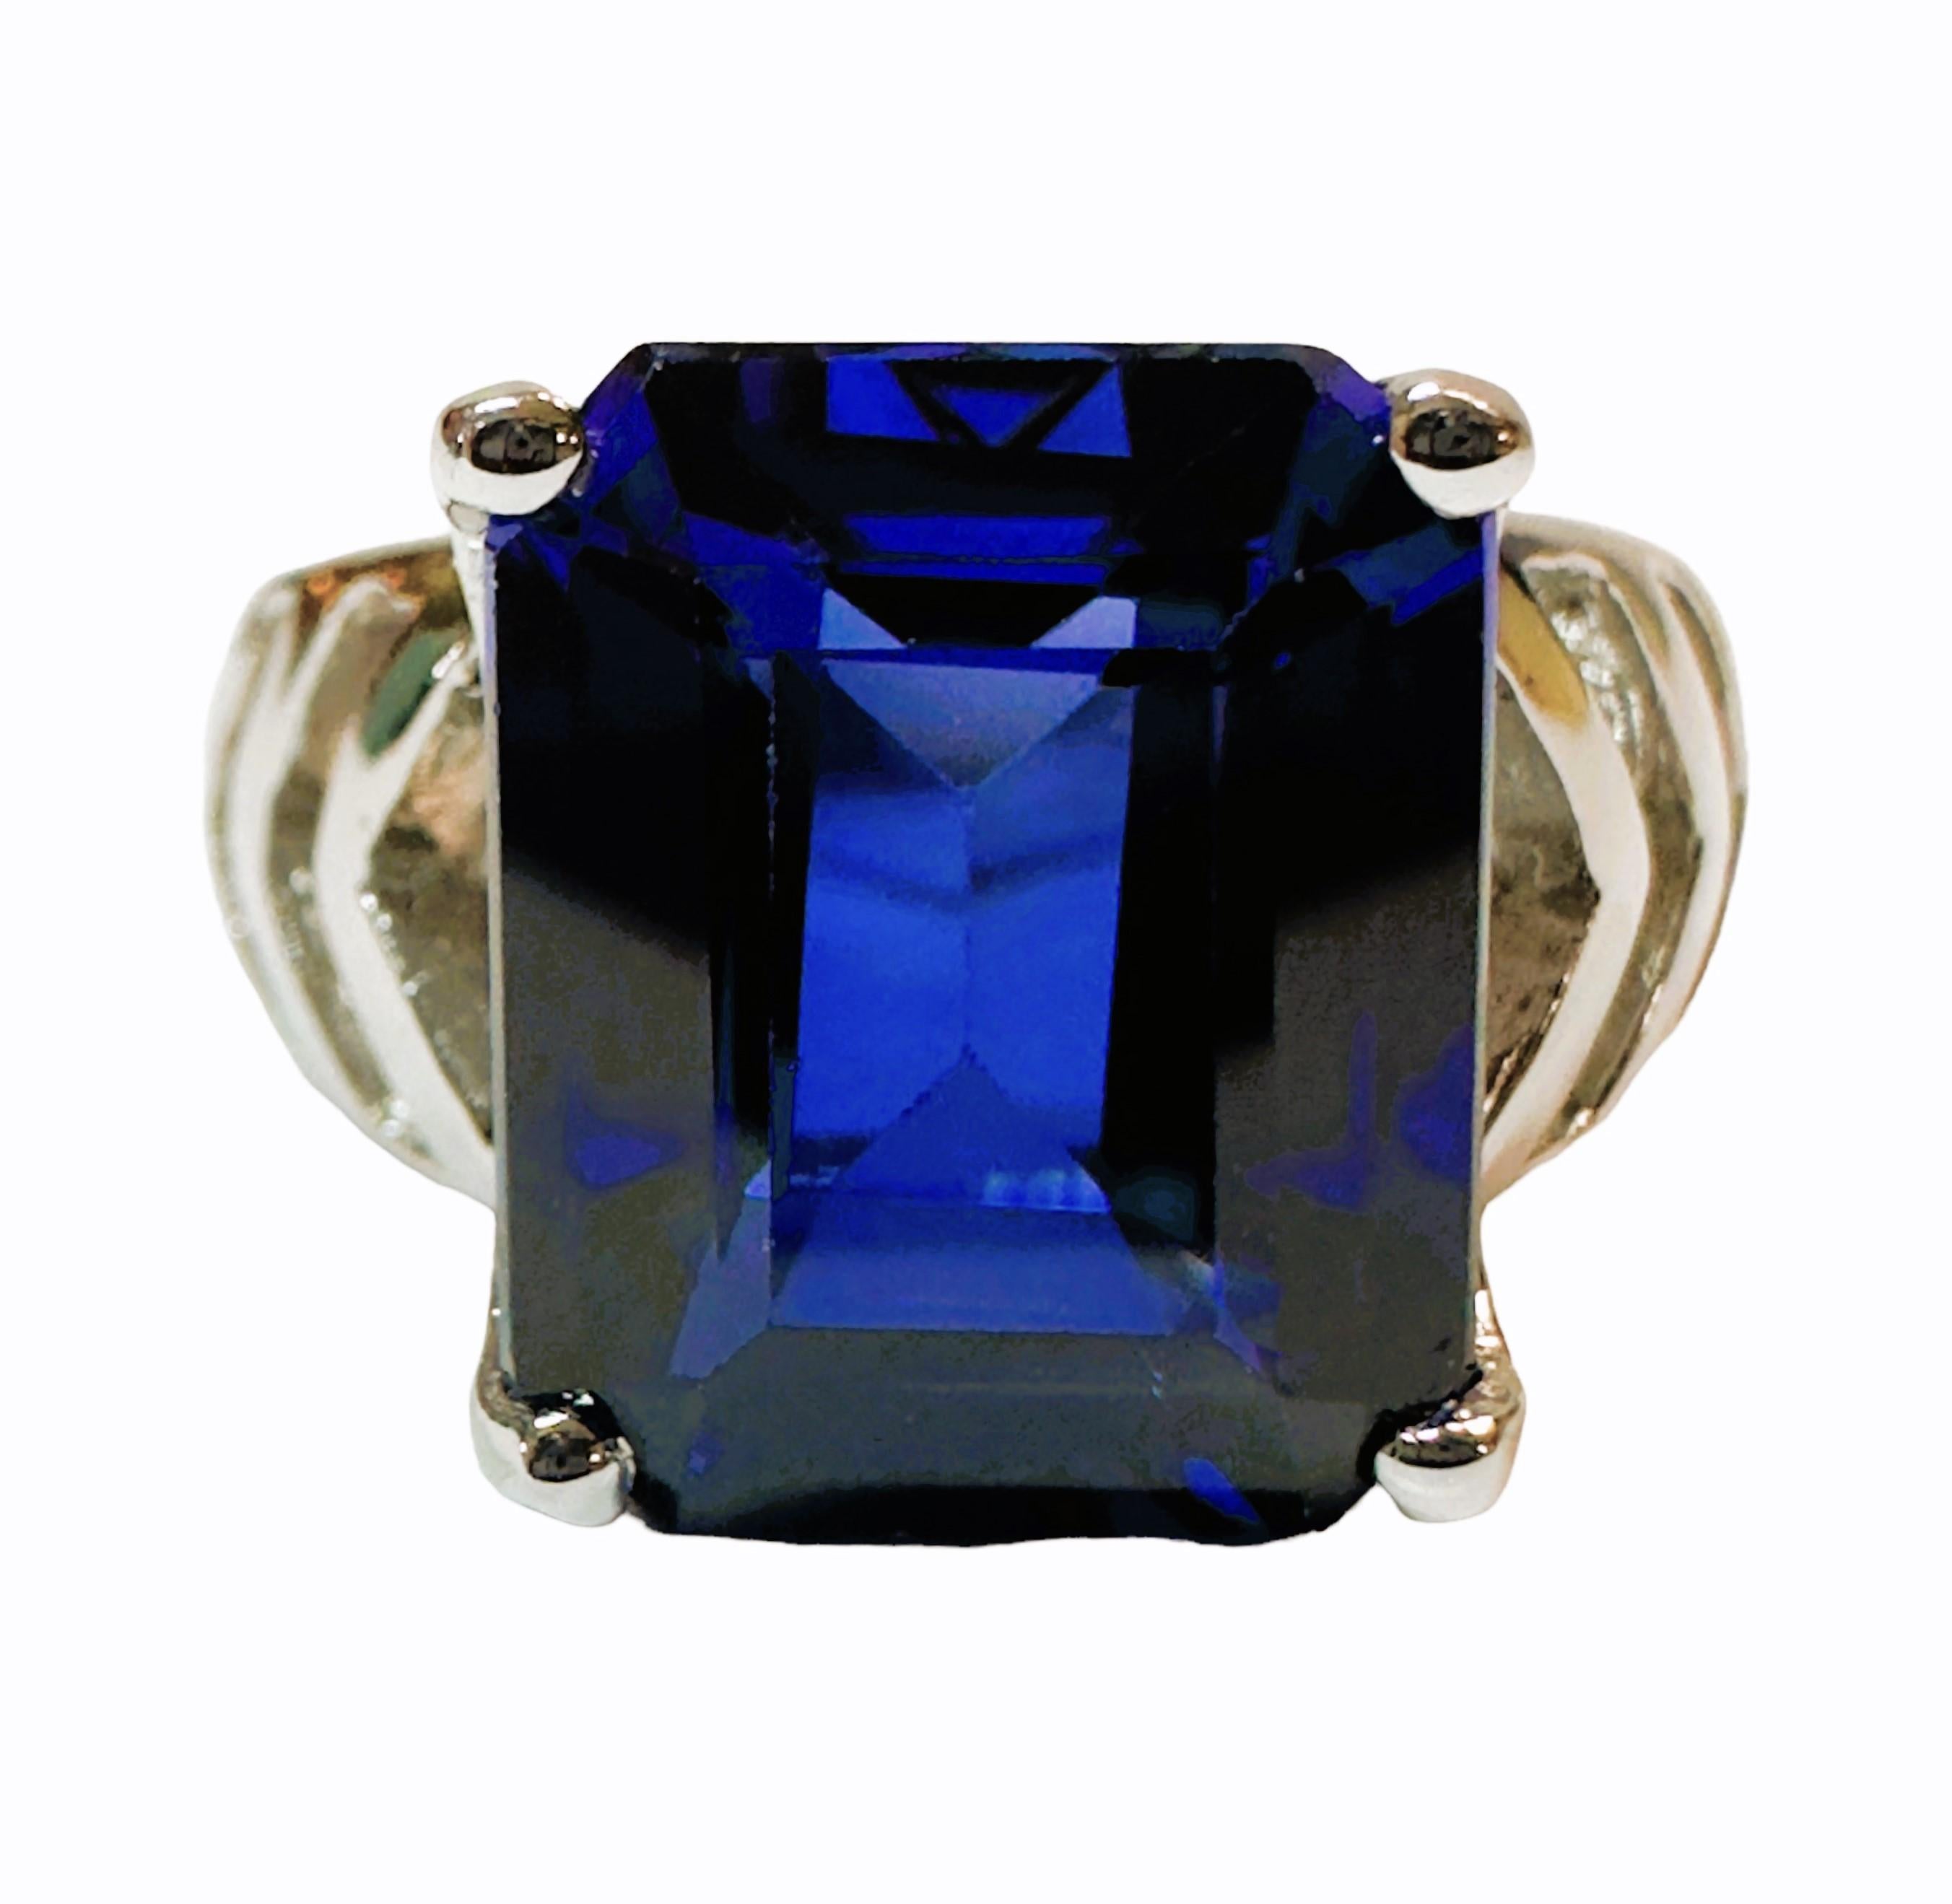 The ring is a size 7.25 and has just a beautiful and brilliant sapphire stone.  It is a high quality stone.  The stone is an emerald cut stone and is 8.30 cts.   It measures 12 x 9.7 mm.  It is in a beautiful handmade laser cut setting that has a